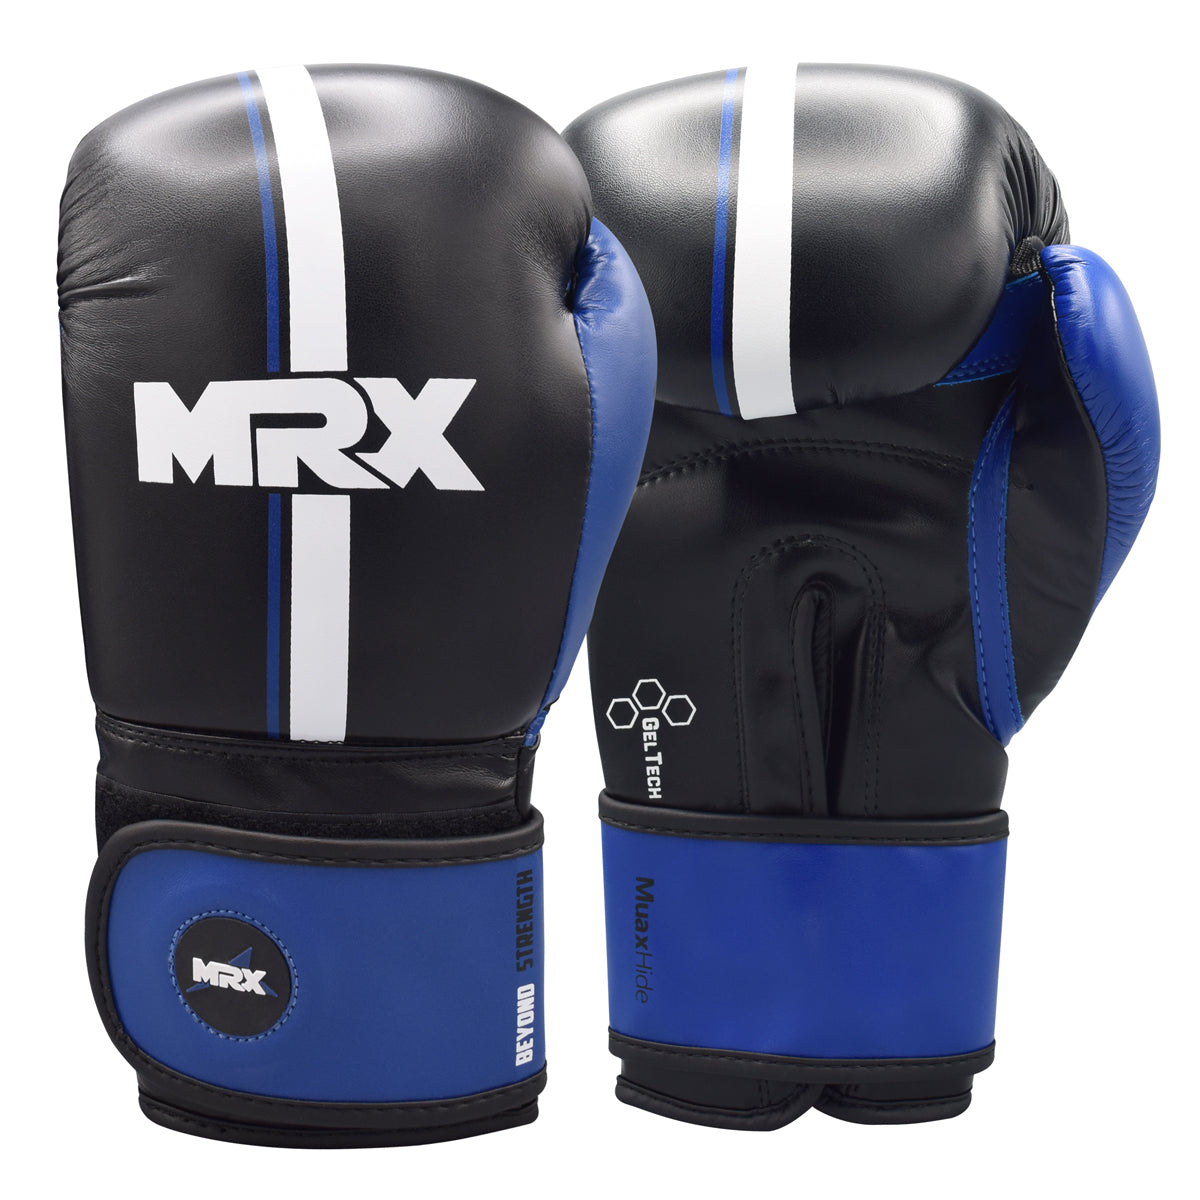 MRX Boxing Gloves for Sparring Fighting Training Kickboxing